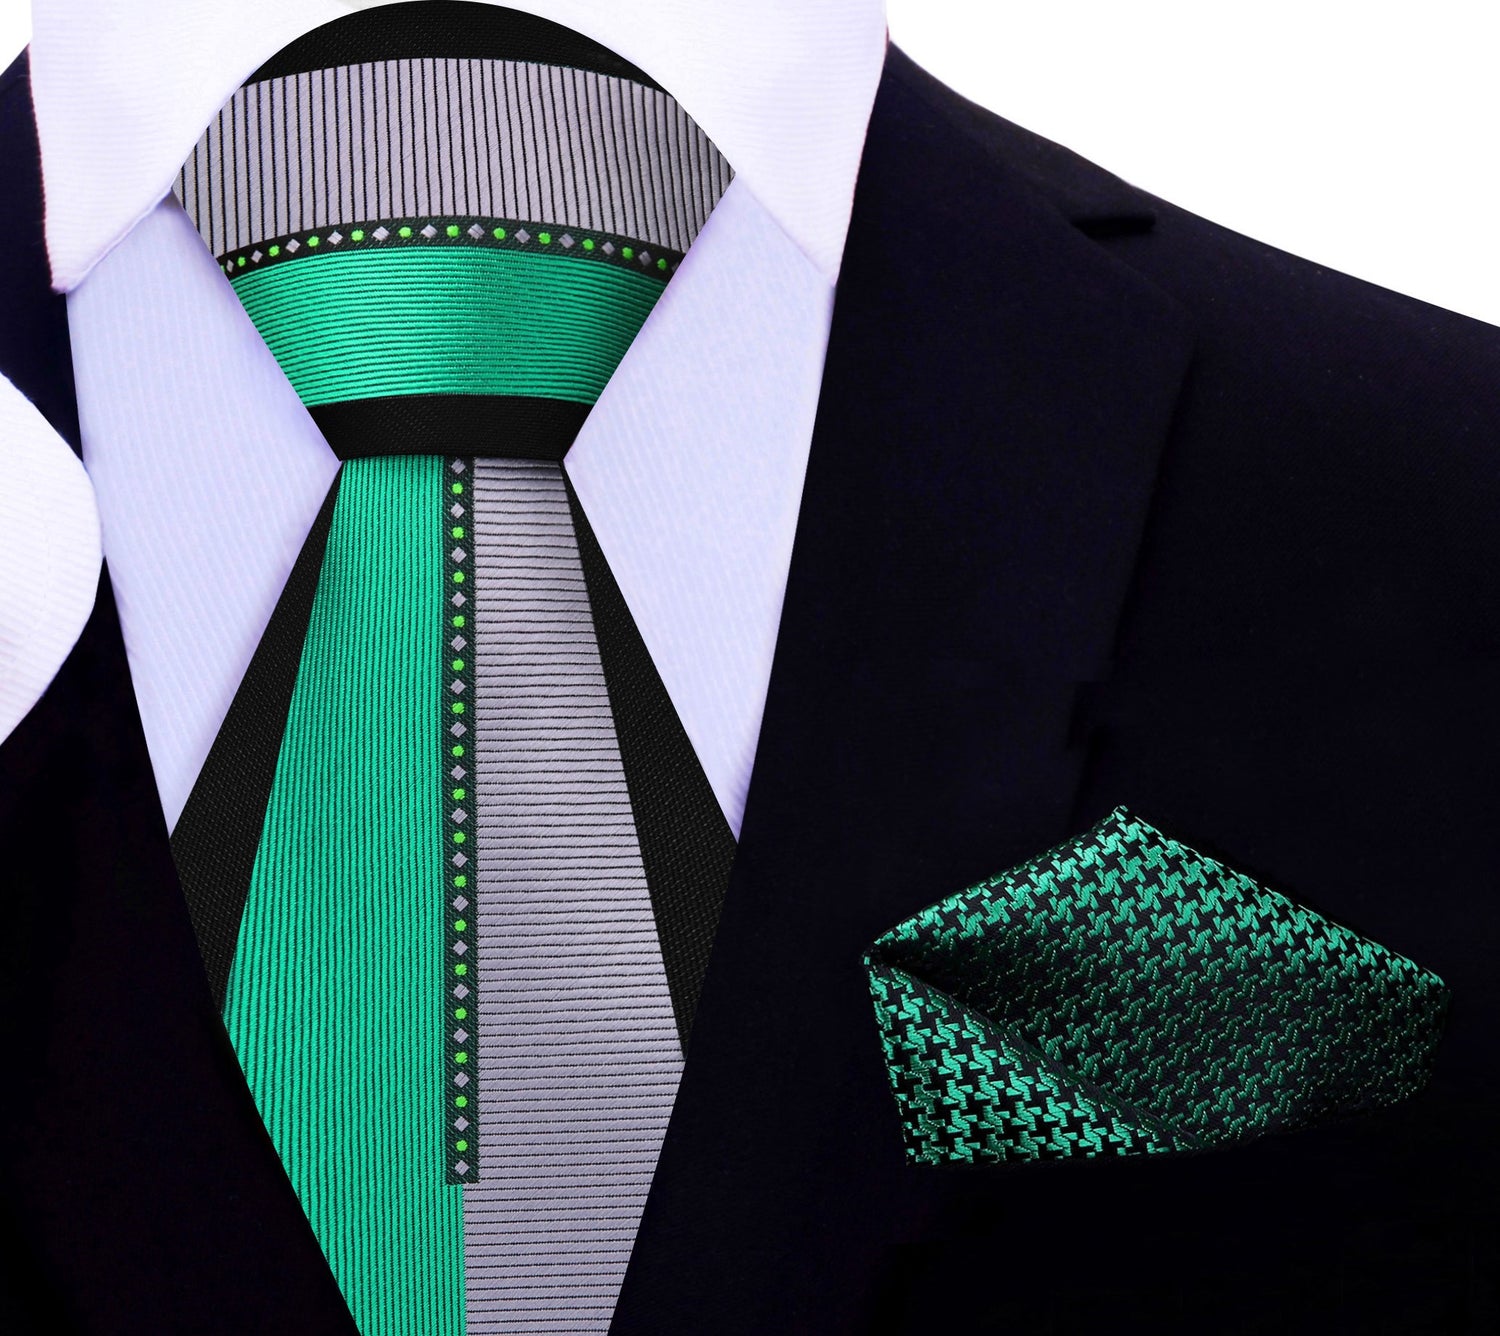 Black, Green, Grey Abstract Tie with Green, Black Hounds Tooth Pocket Square